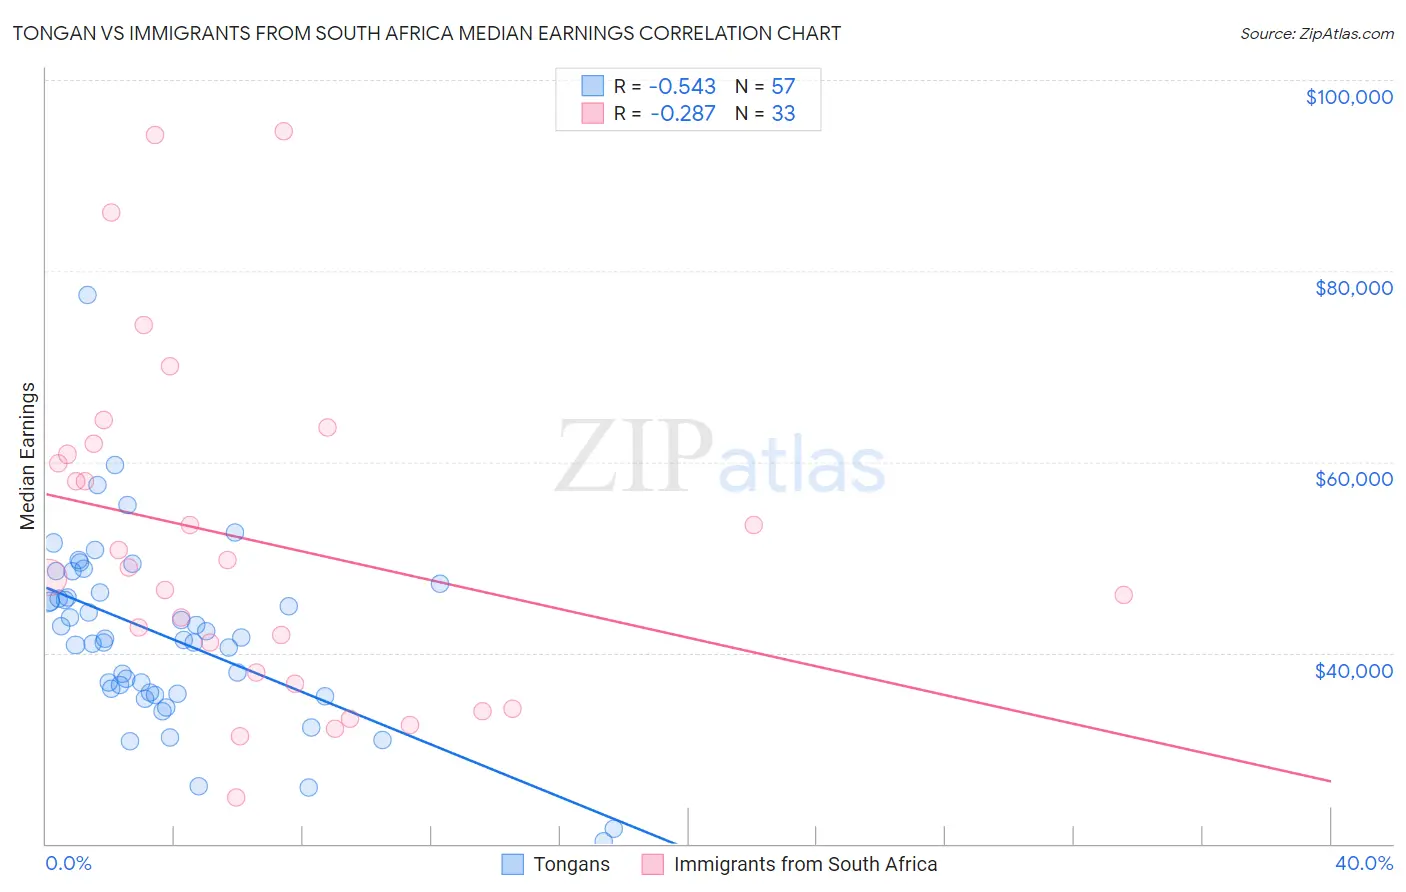 Tongan vs Immigrants from South Africa Median Earnings